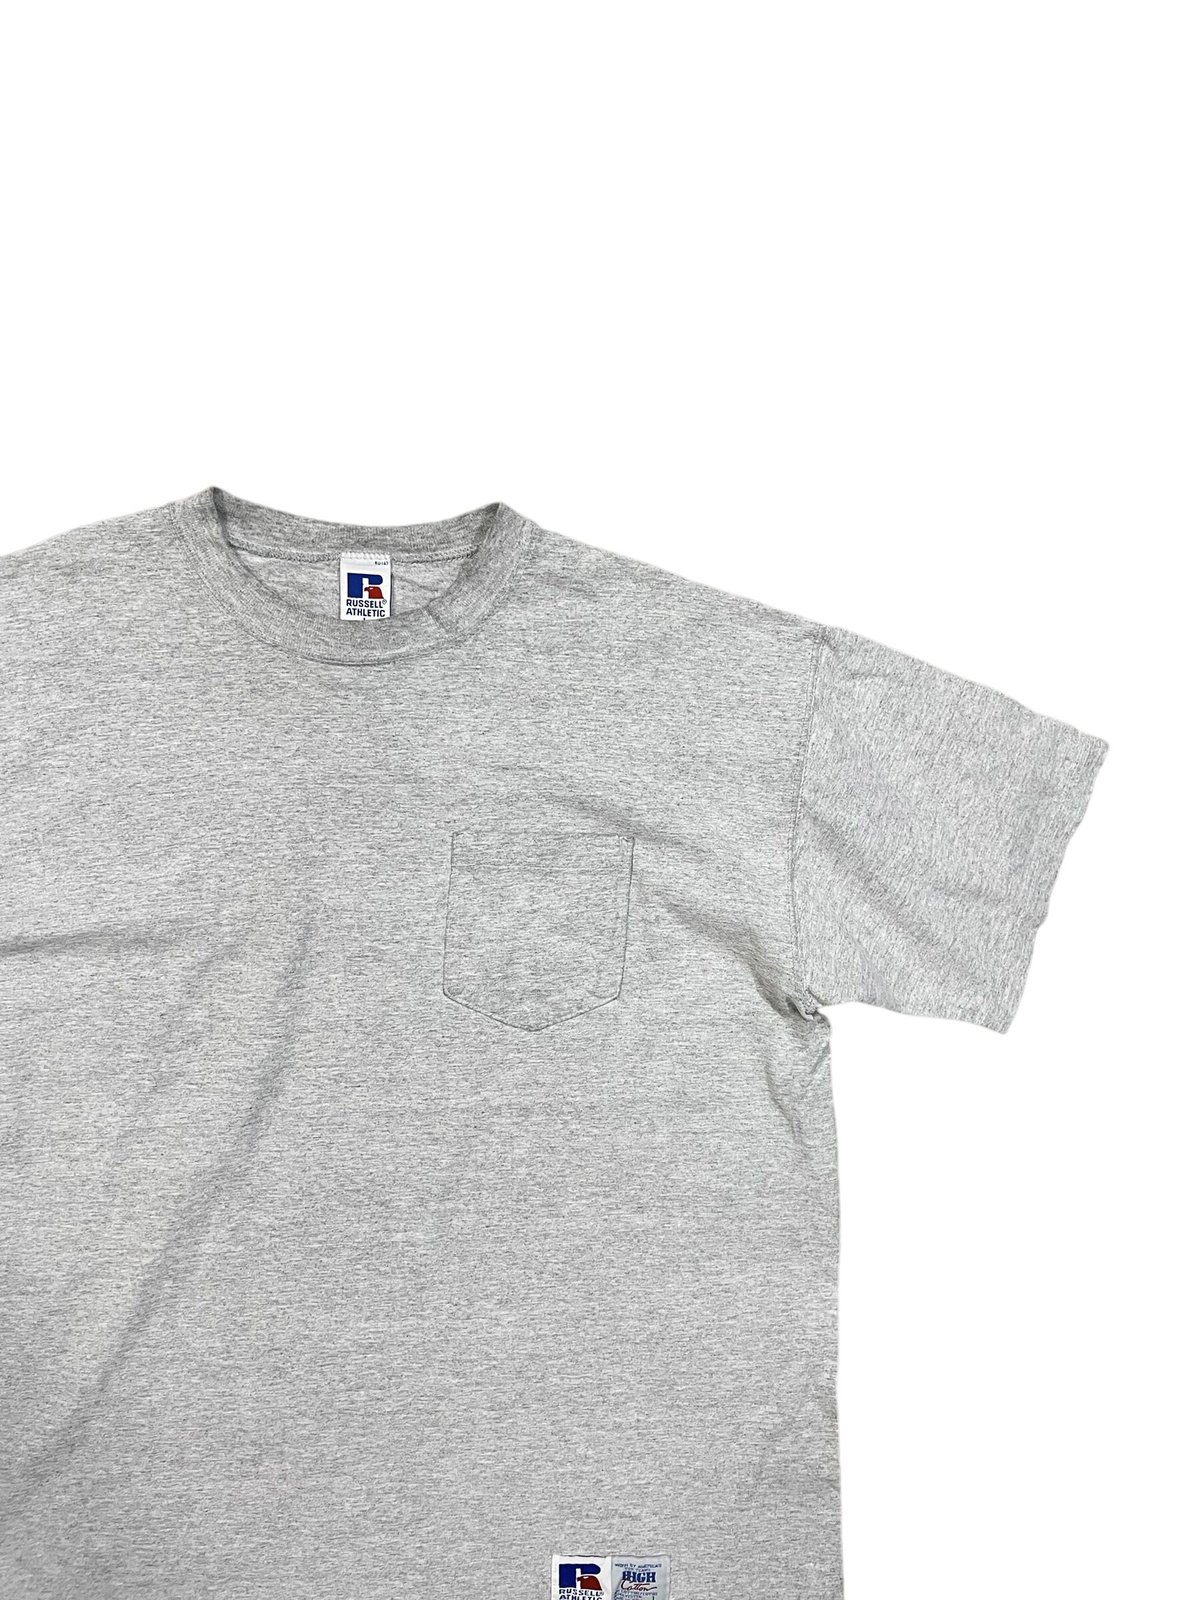 Russell athletic Pocket Tee Size-L MADE IN USA